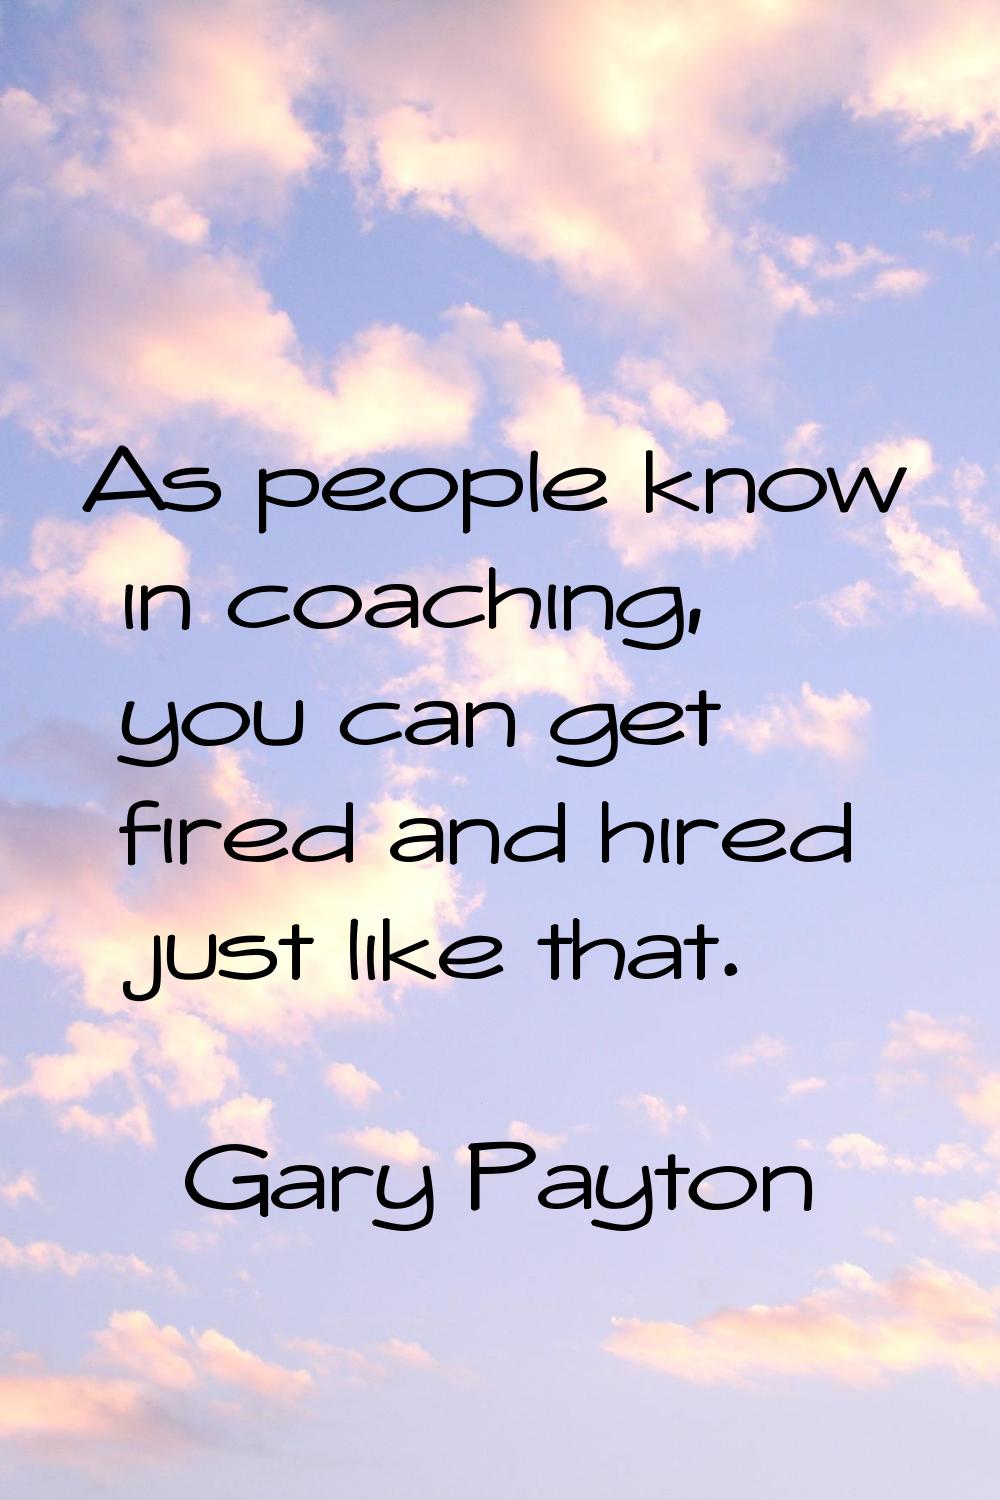 As people know in coaching, you can get fired and hired just like that.